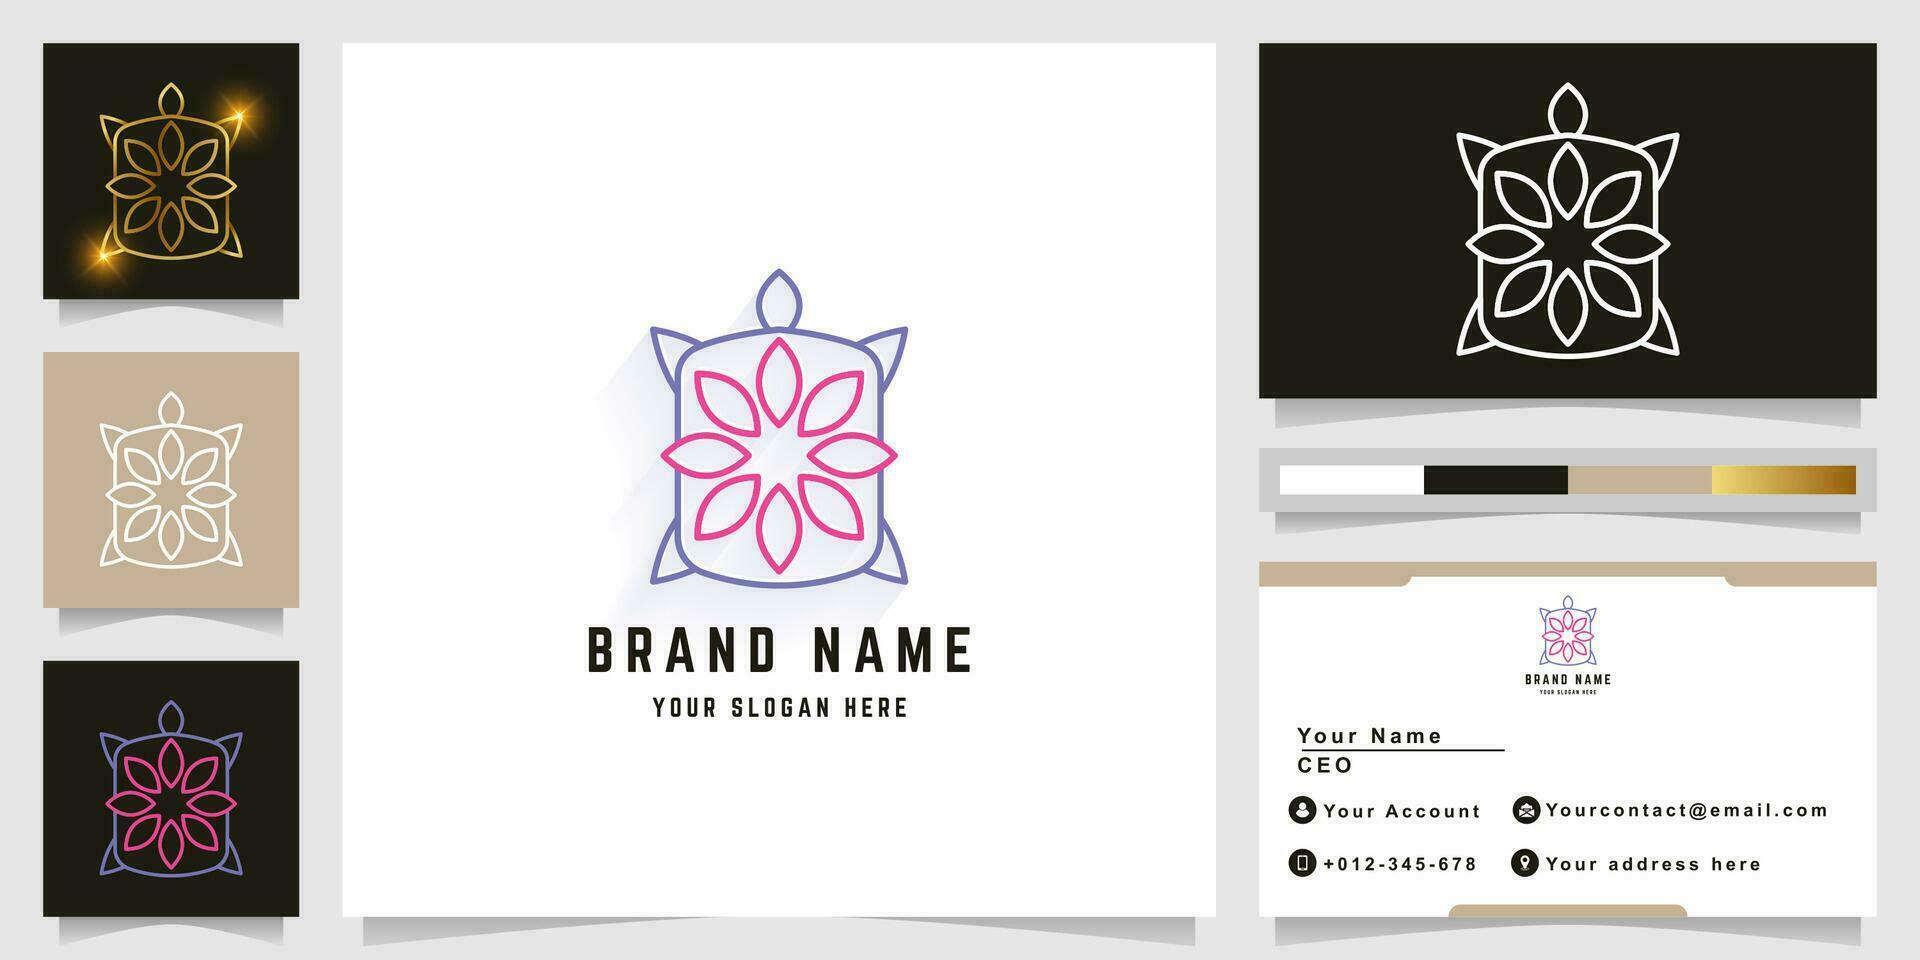 Turtle and flower logo with business card design vector